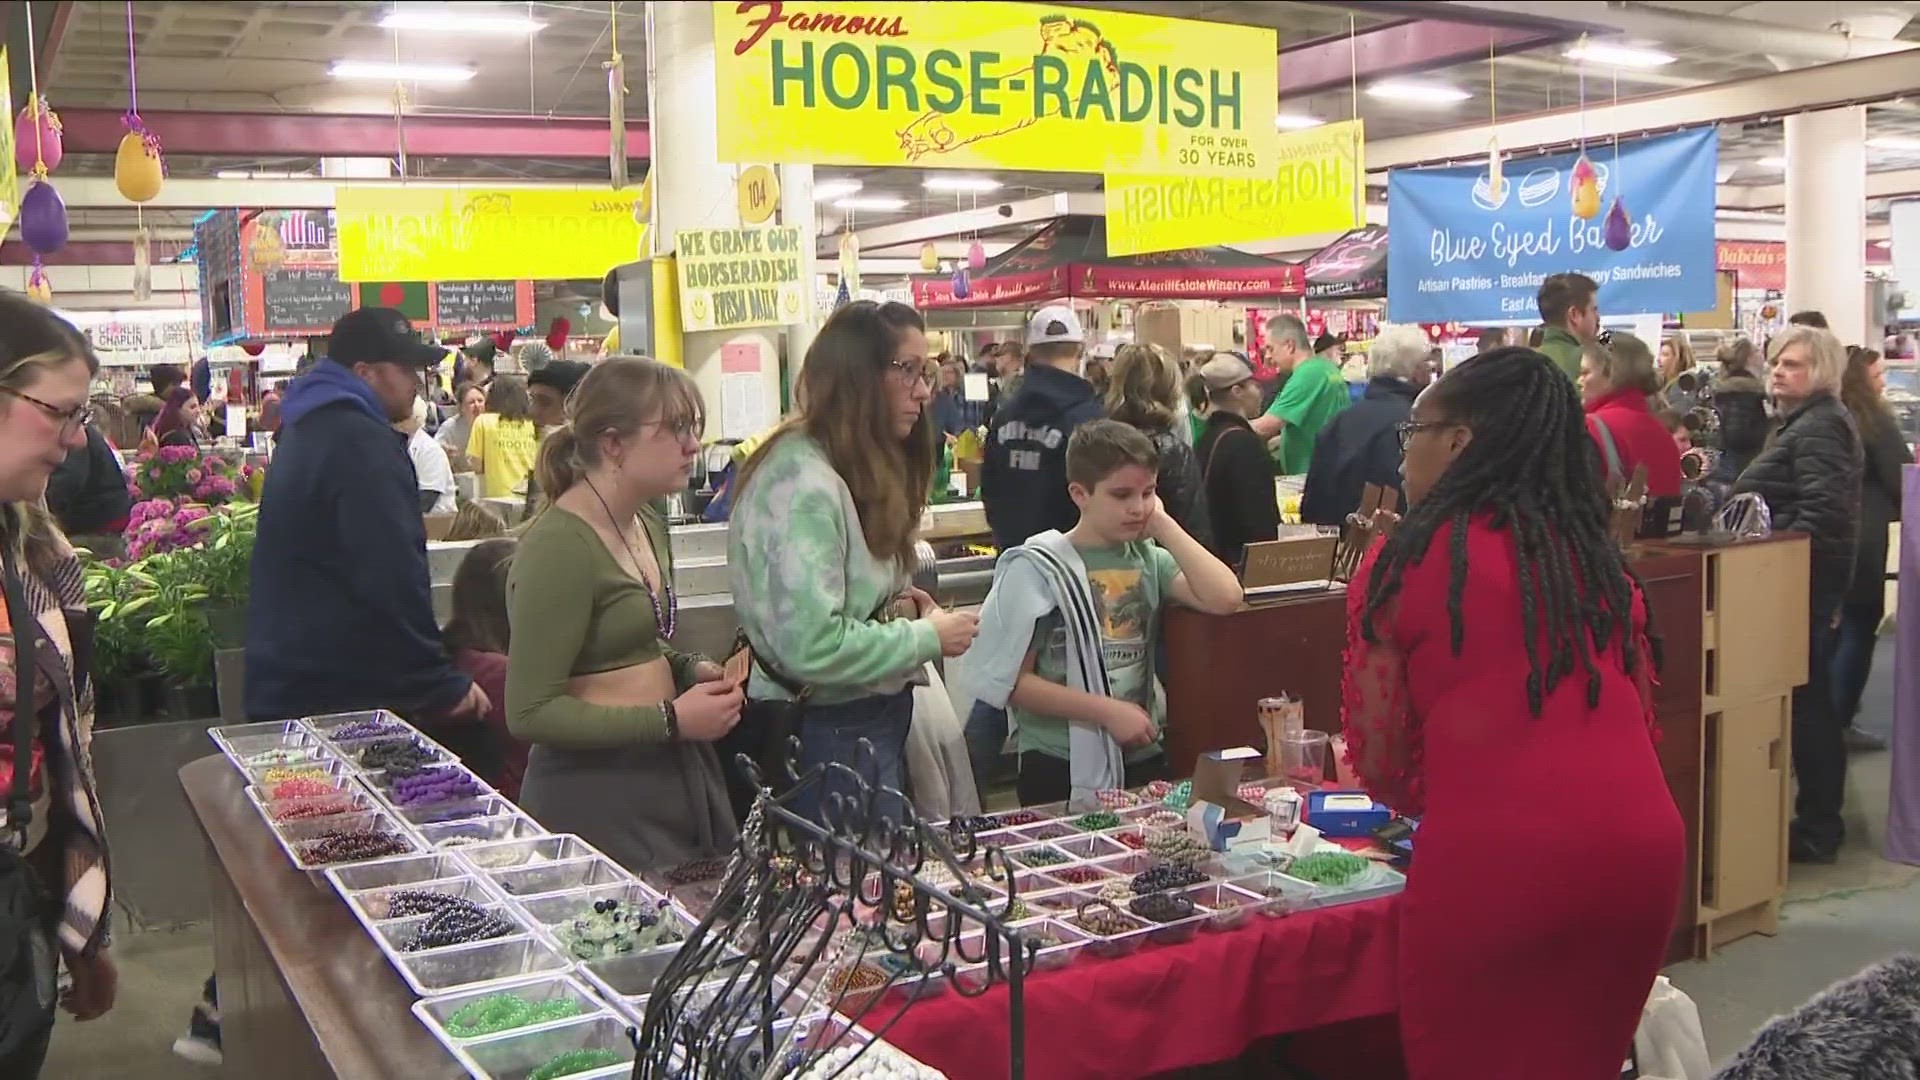 Dozens of vendors set up shop, making The Broadway Market a one-stop shop ahead of the holiday.